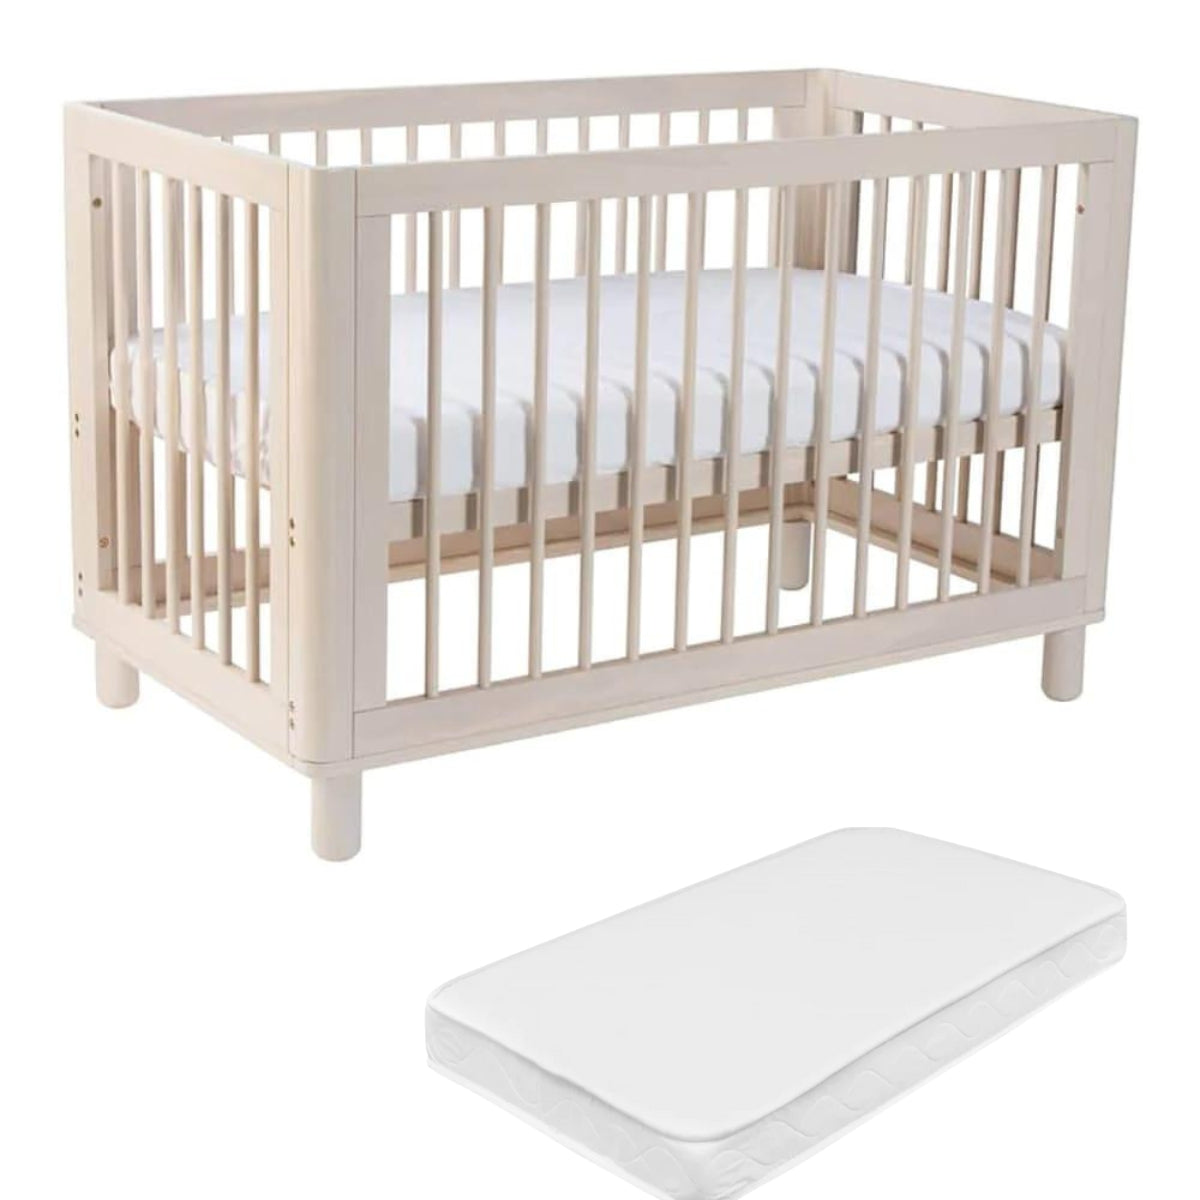 Cocoon Allure Cot with Mattress -4 in 1 Natural wash